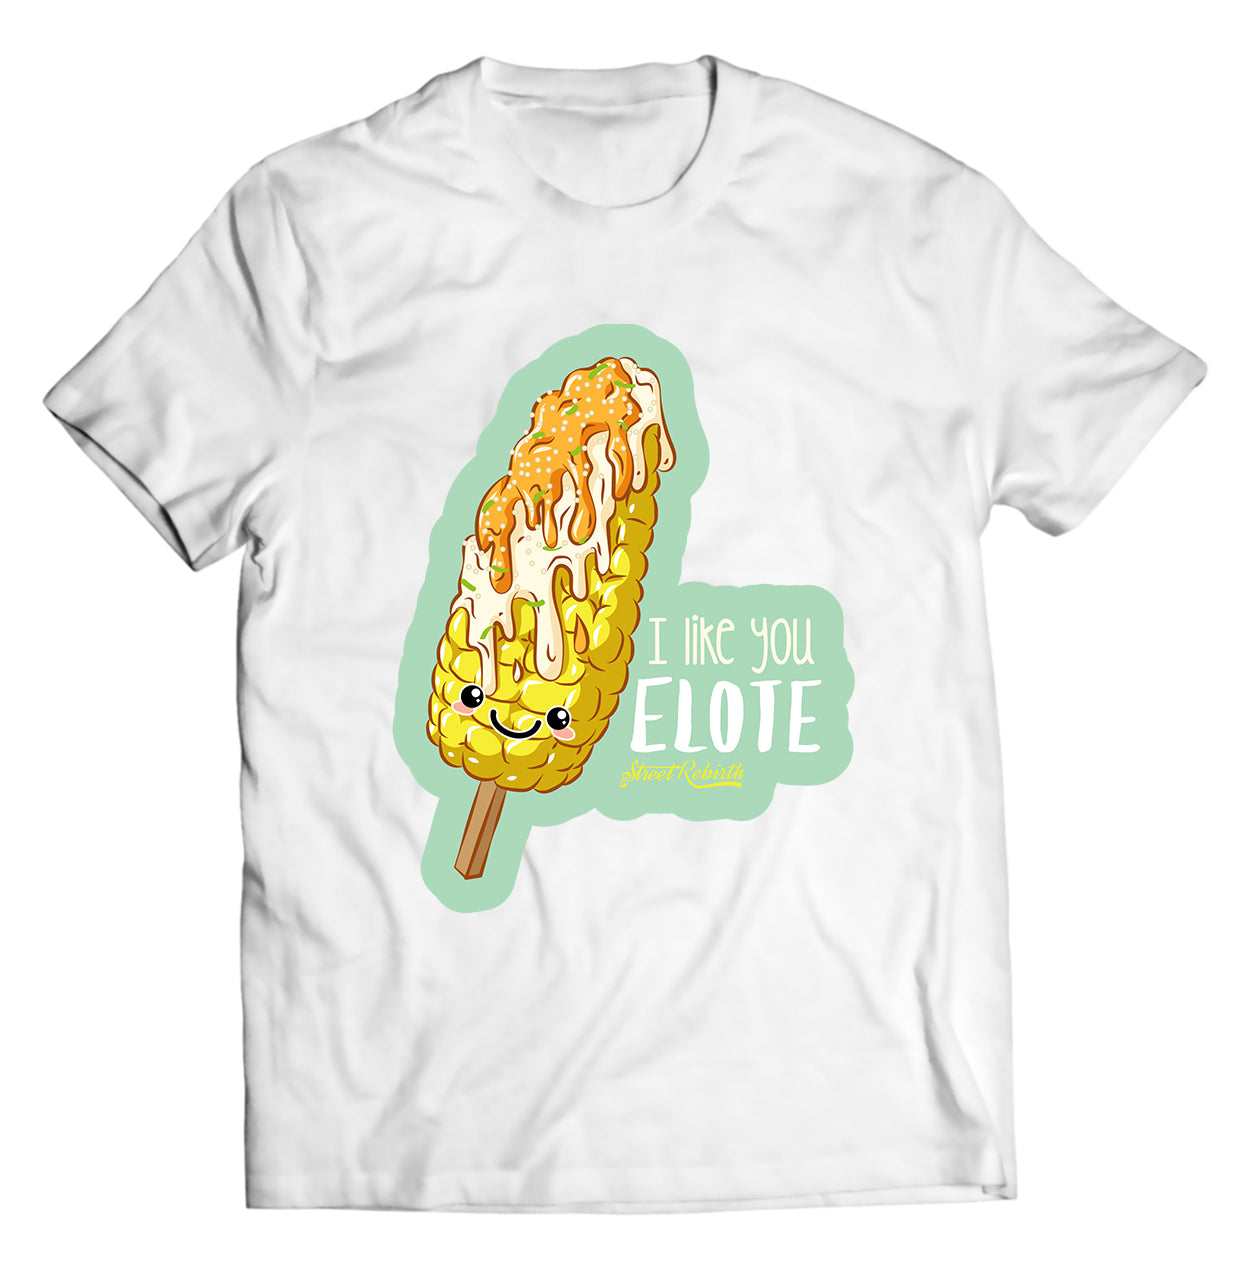 I Like You Elote Shirt - Direct To Garment Quality Print - Unisex Shirt - Gift For Him or Her